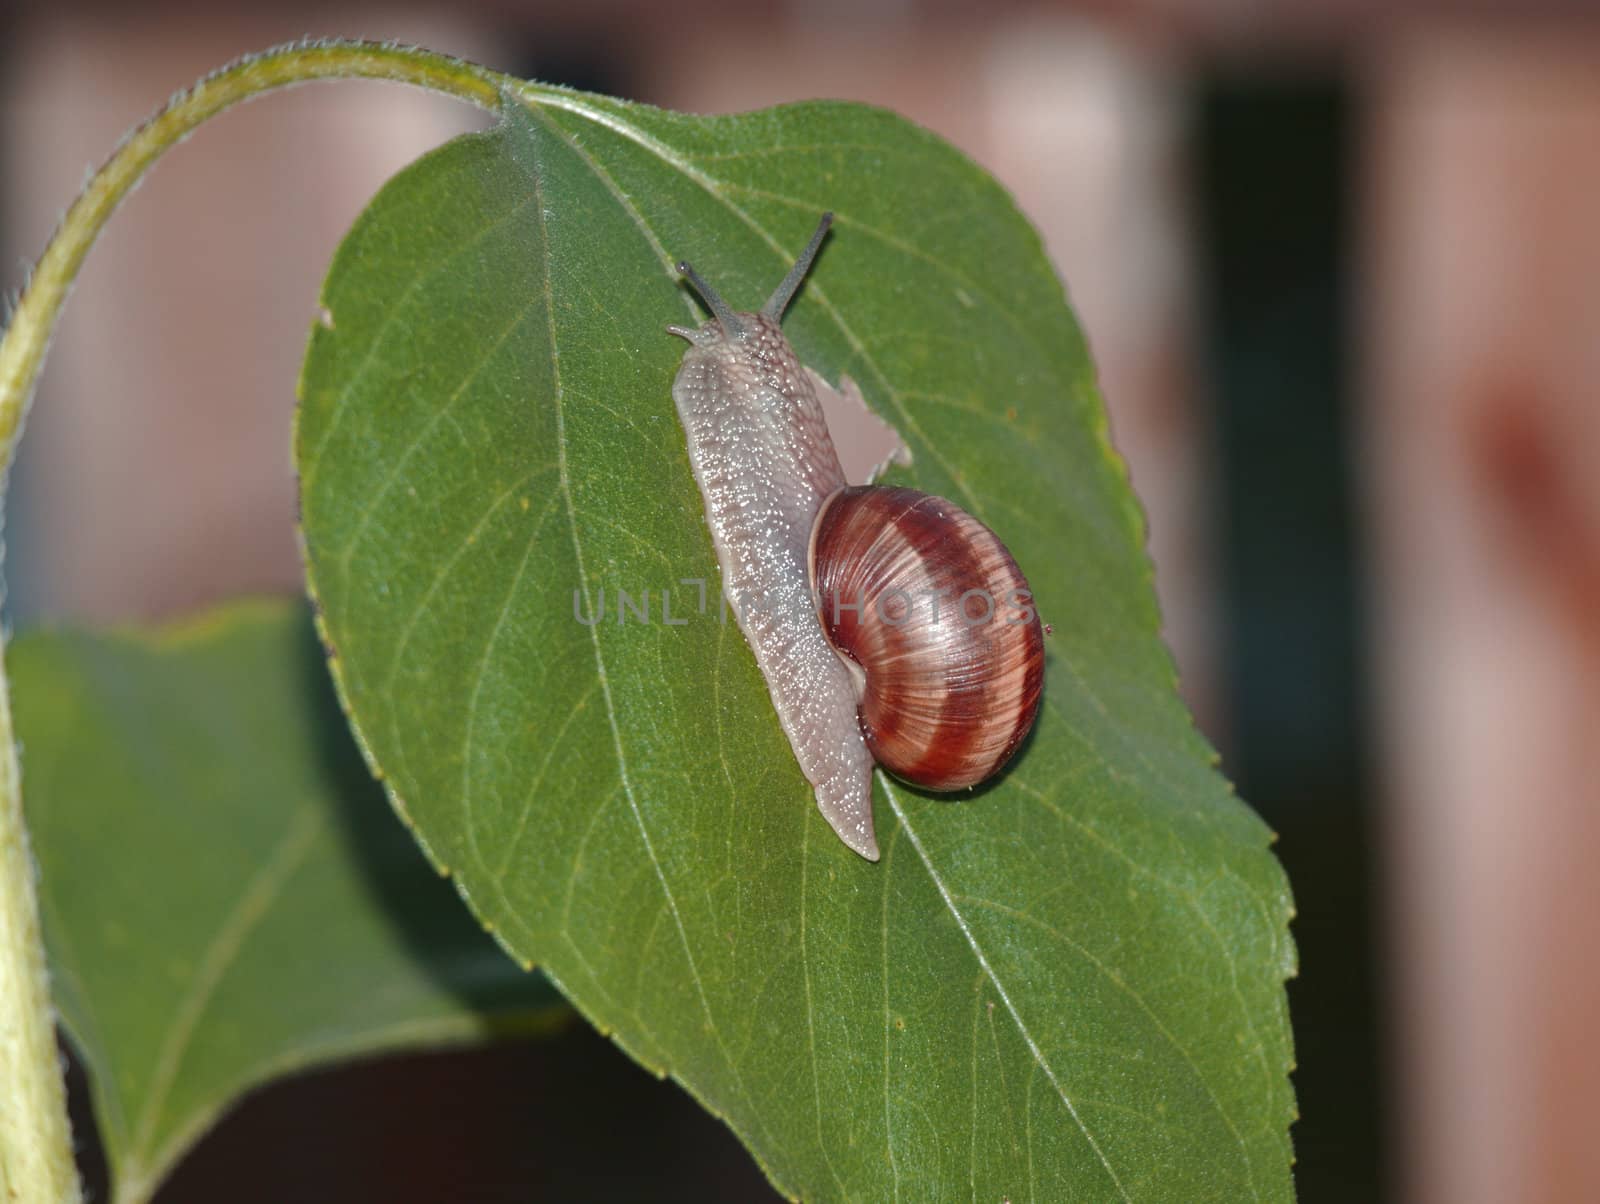 the small snail - pest in our garden